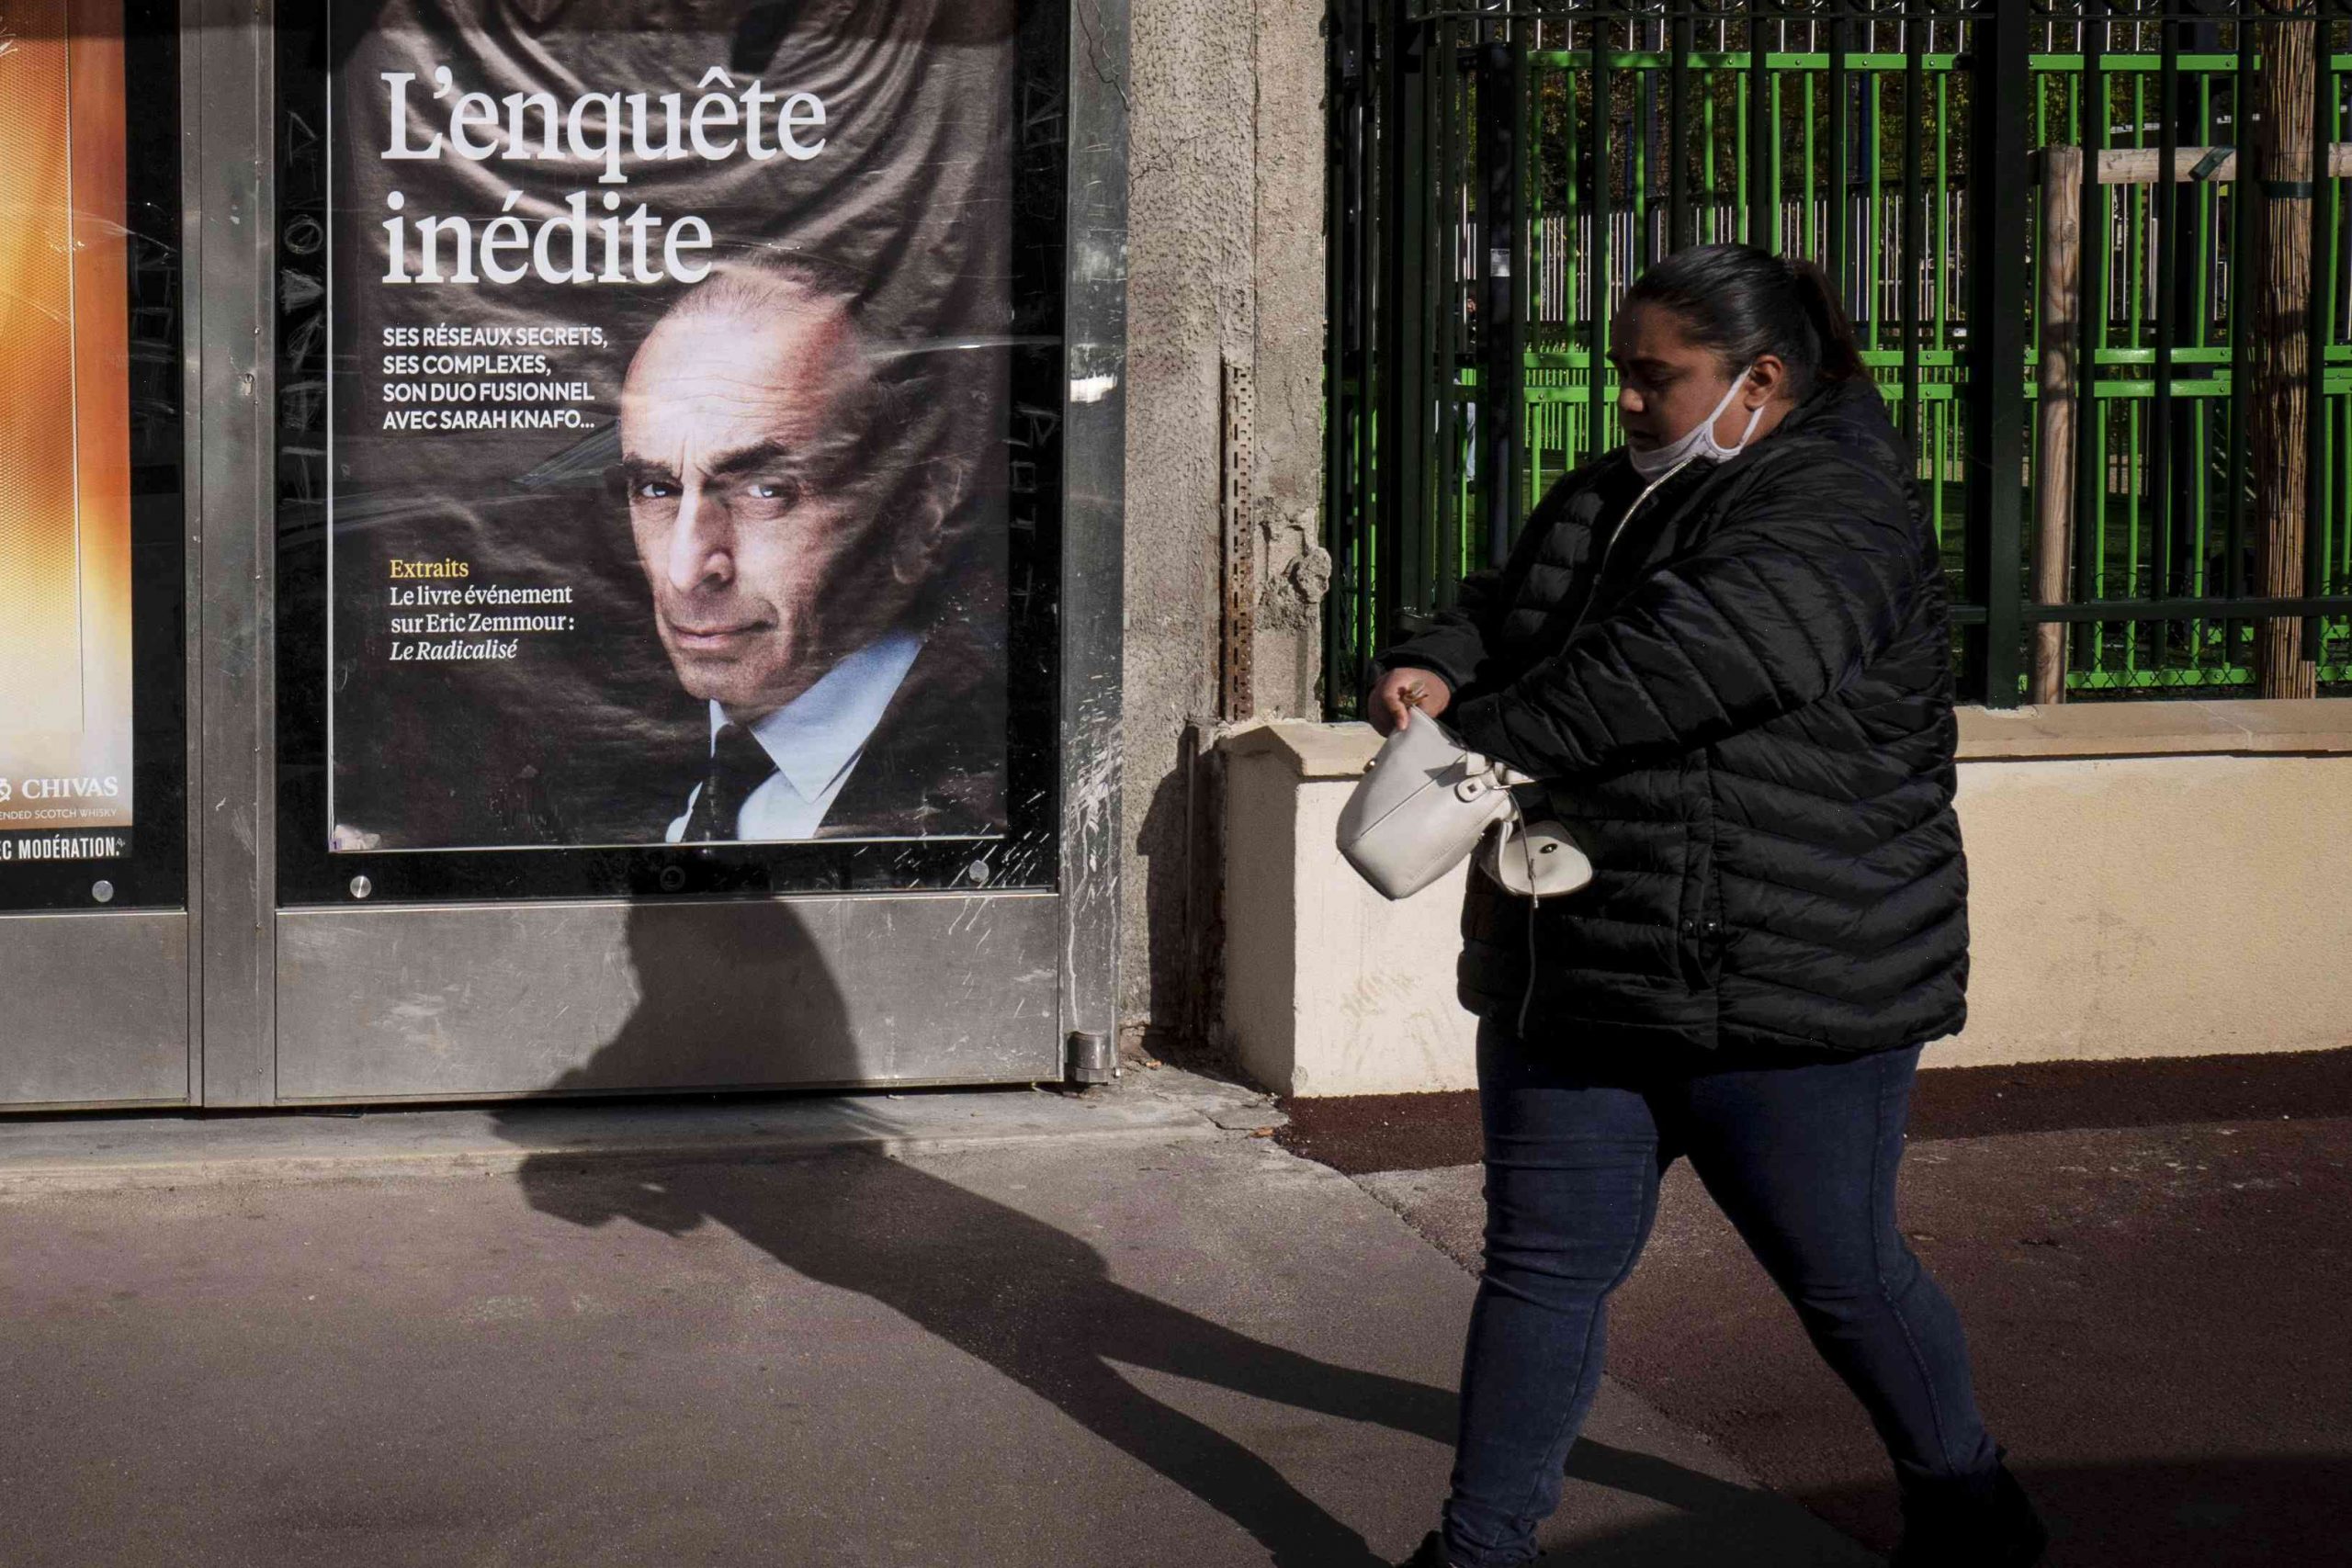 Could ‘President Blanca’ emerge from the French elections?